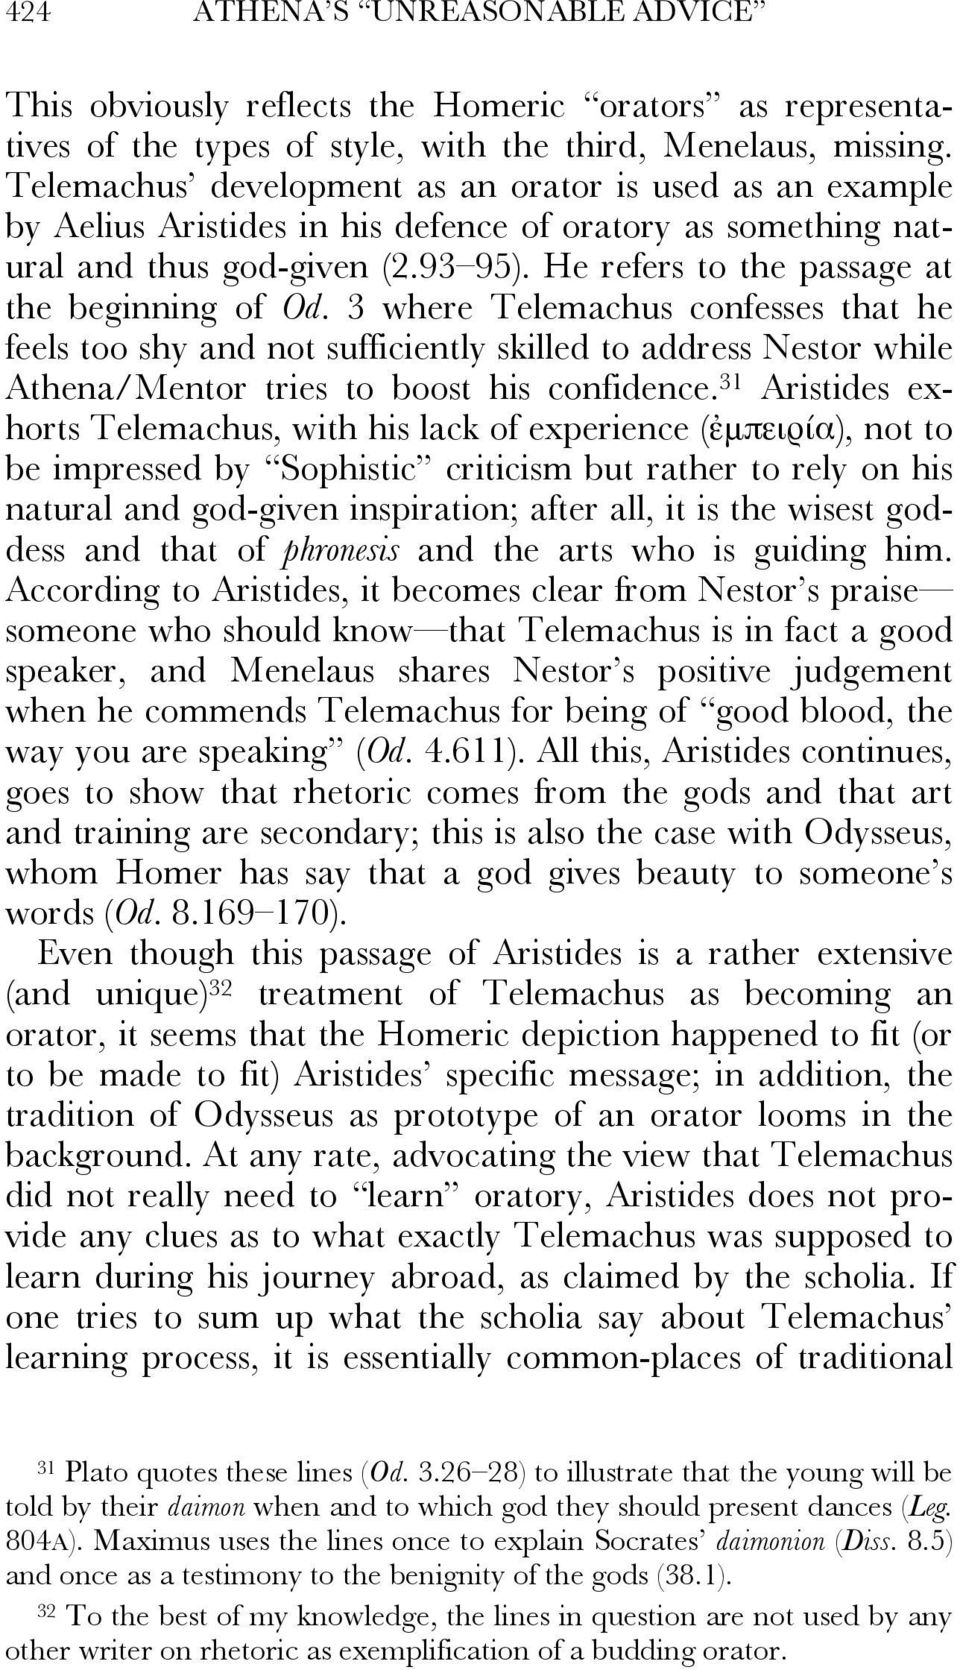 He refers to the passage at the beginning of Od. 3 where Telemachus confesses that he feels too shy and not sufficiently skilled to address Nestor while Athena/Mentor tries to boost his confidence.